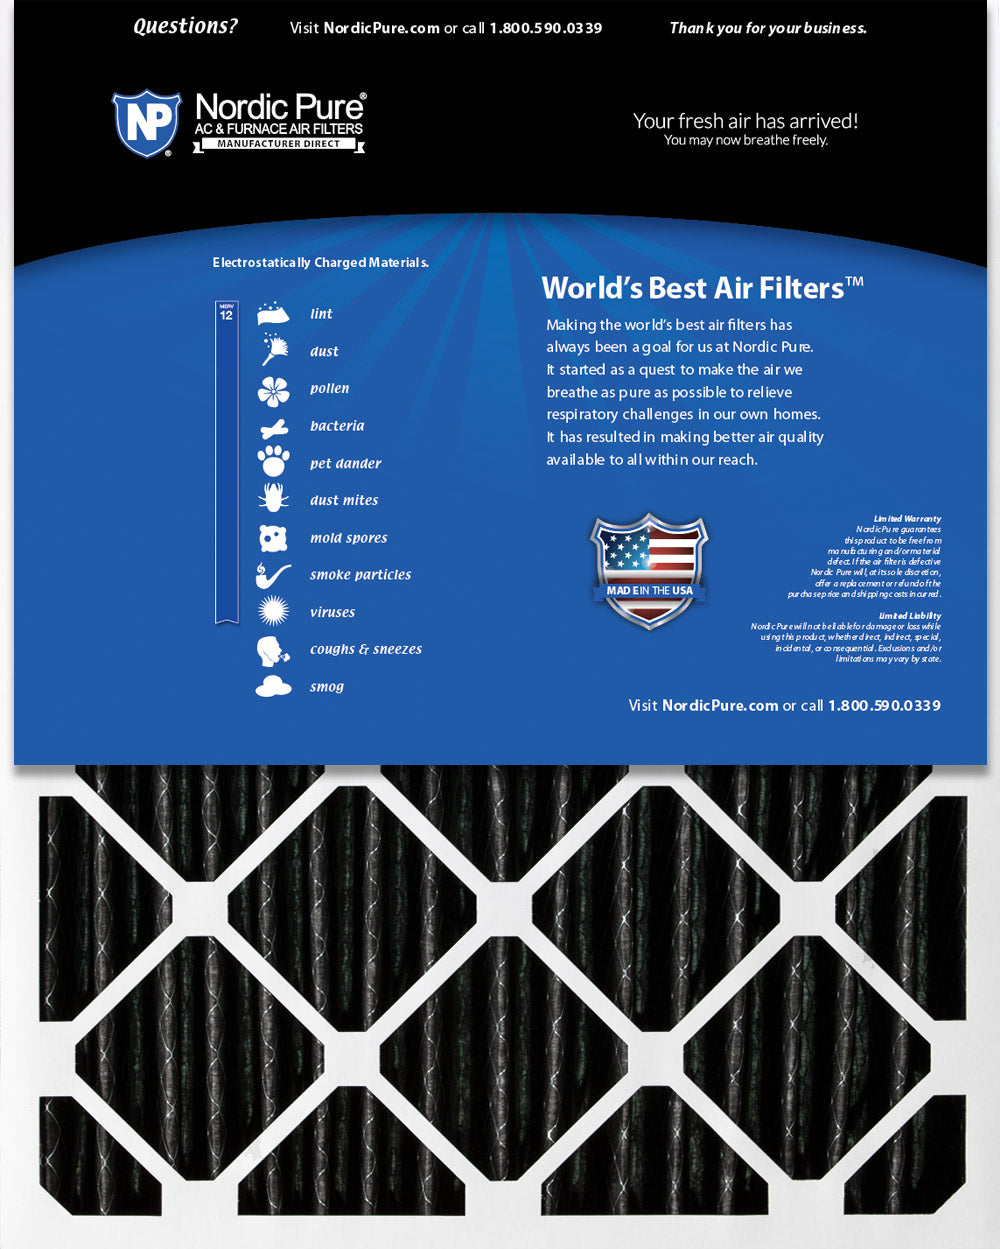 16x25x4 (3 5/8) Furnace Air Filters MERV 12 Pleated Plus Carbon